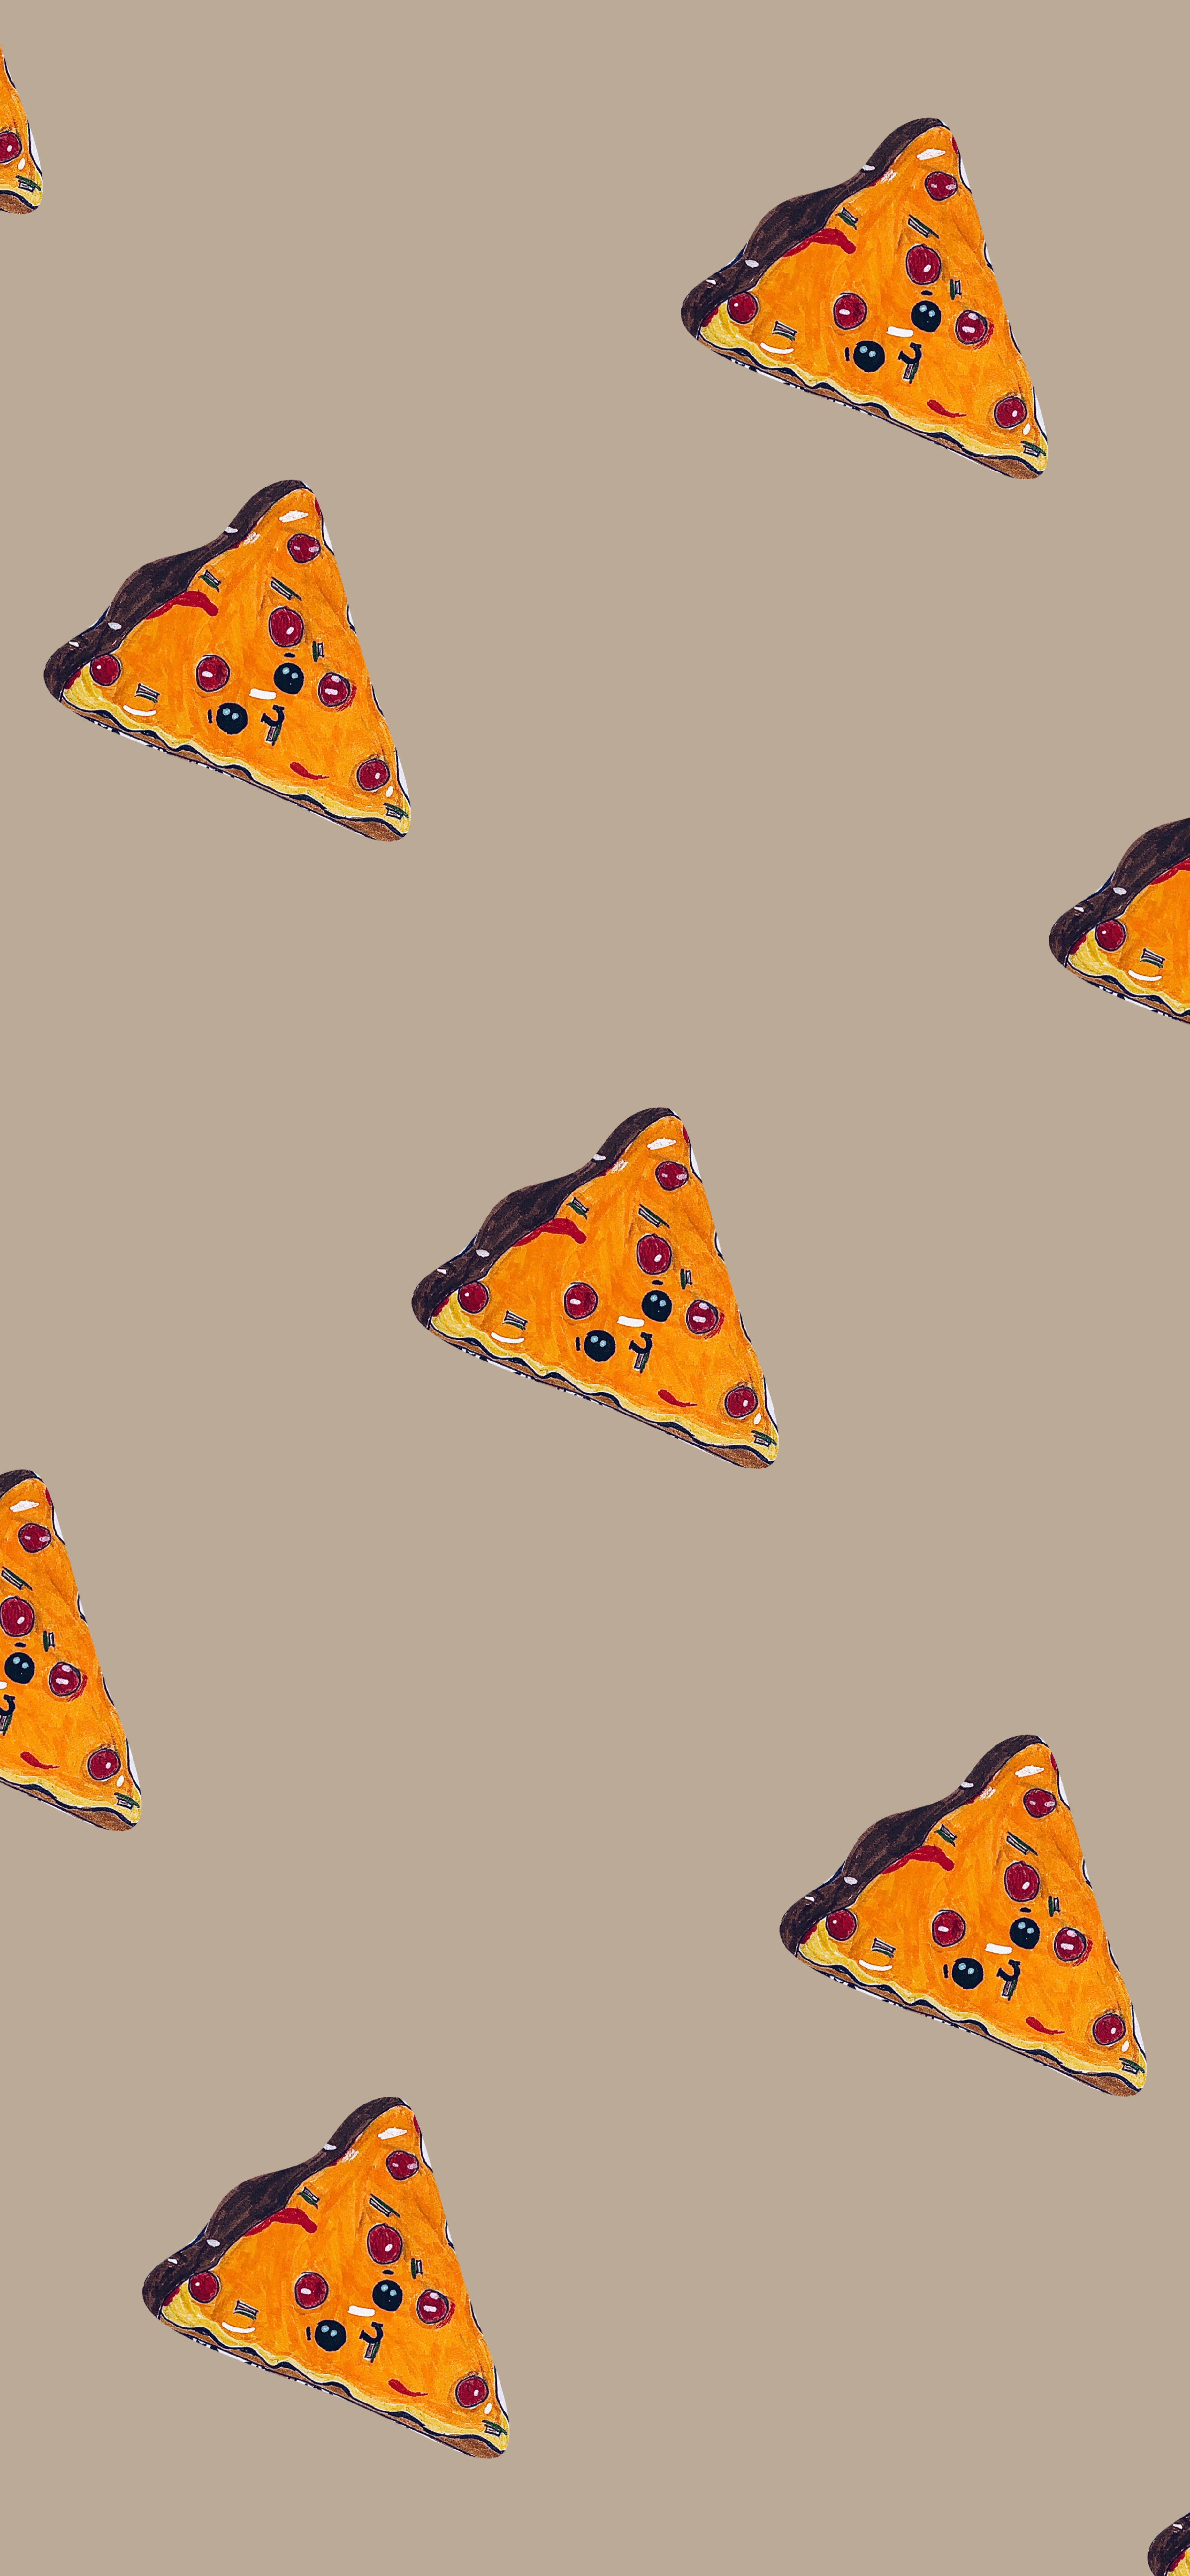 A pattern of slices on top and bottom - Pizza